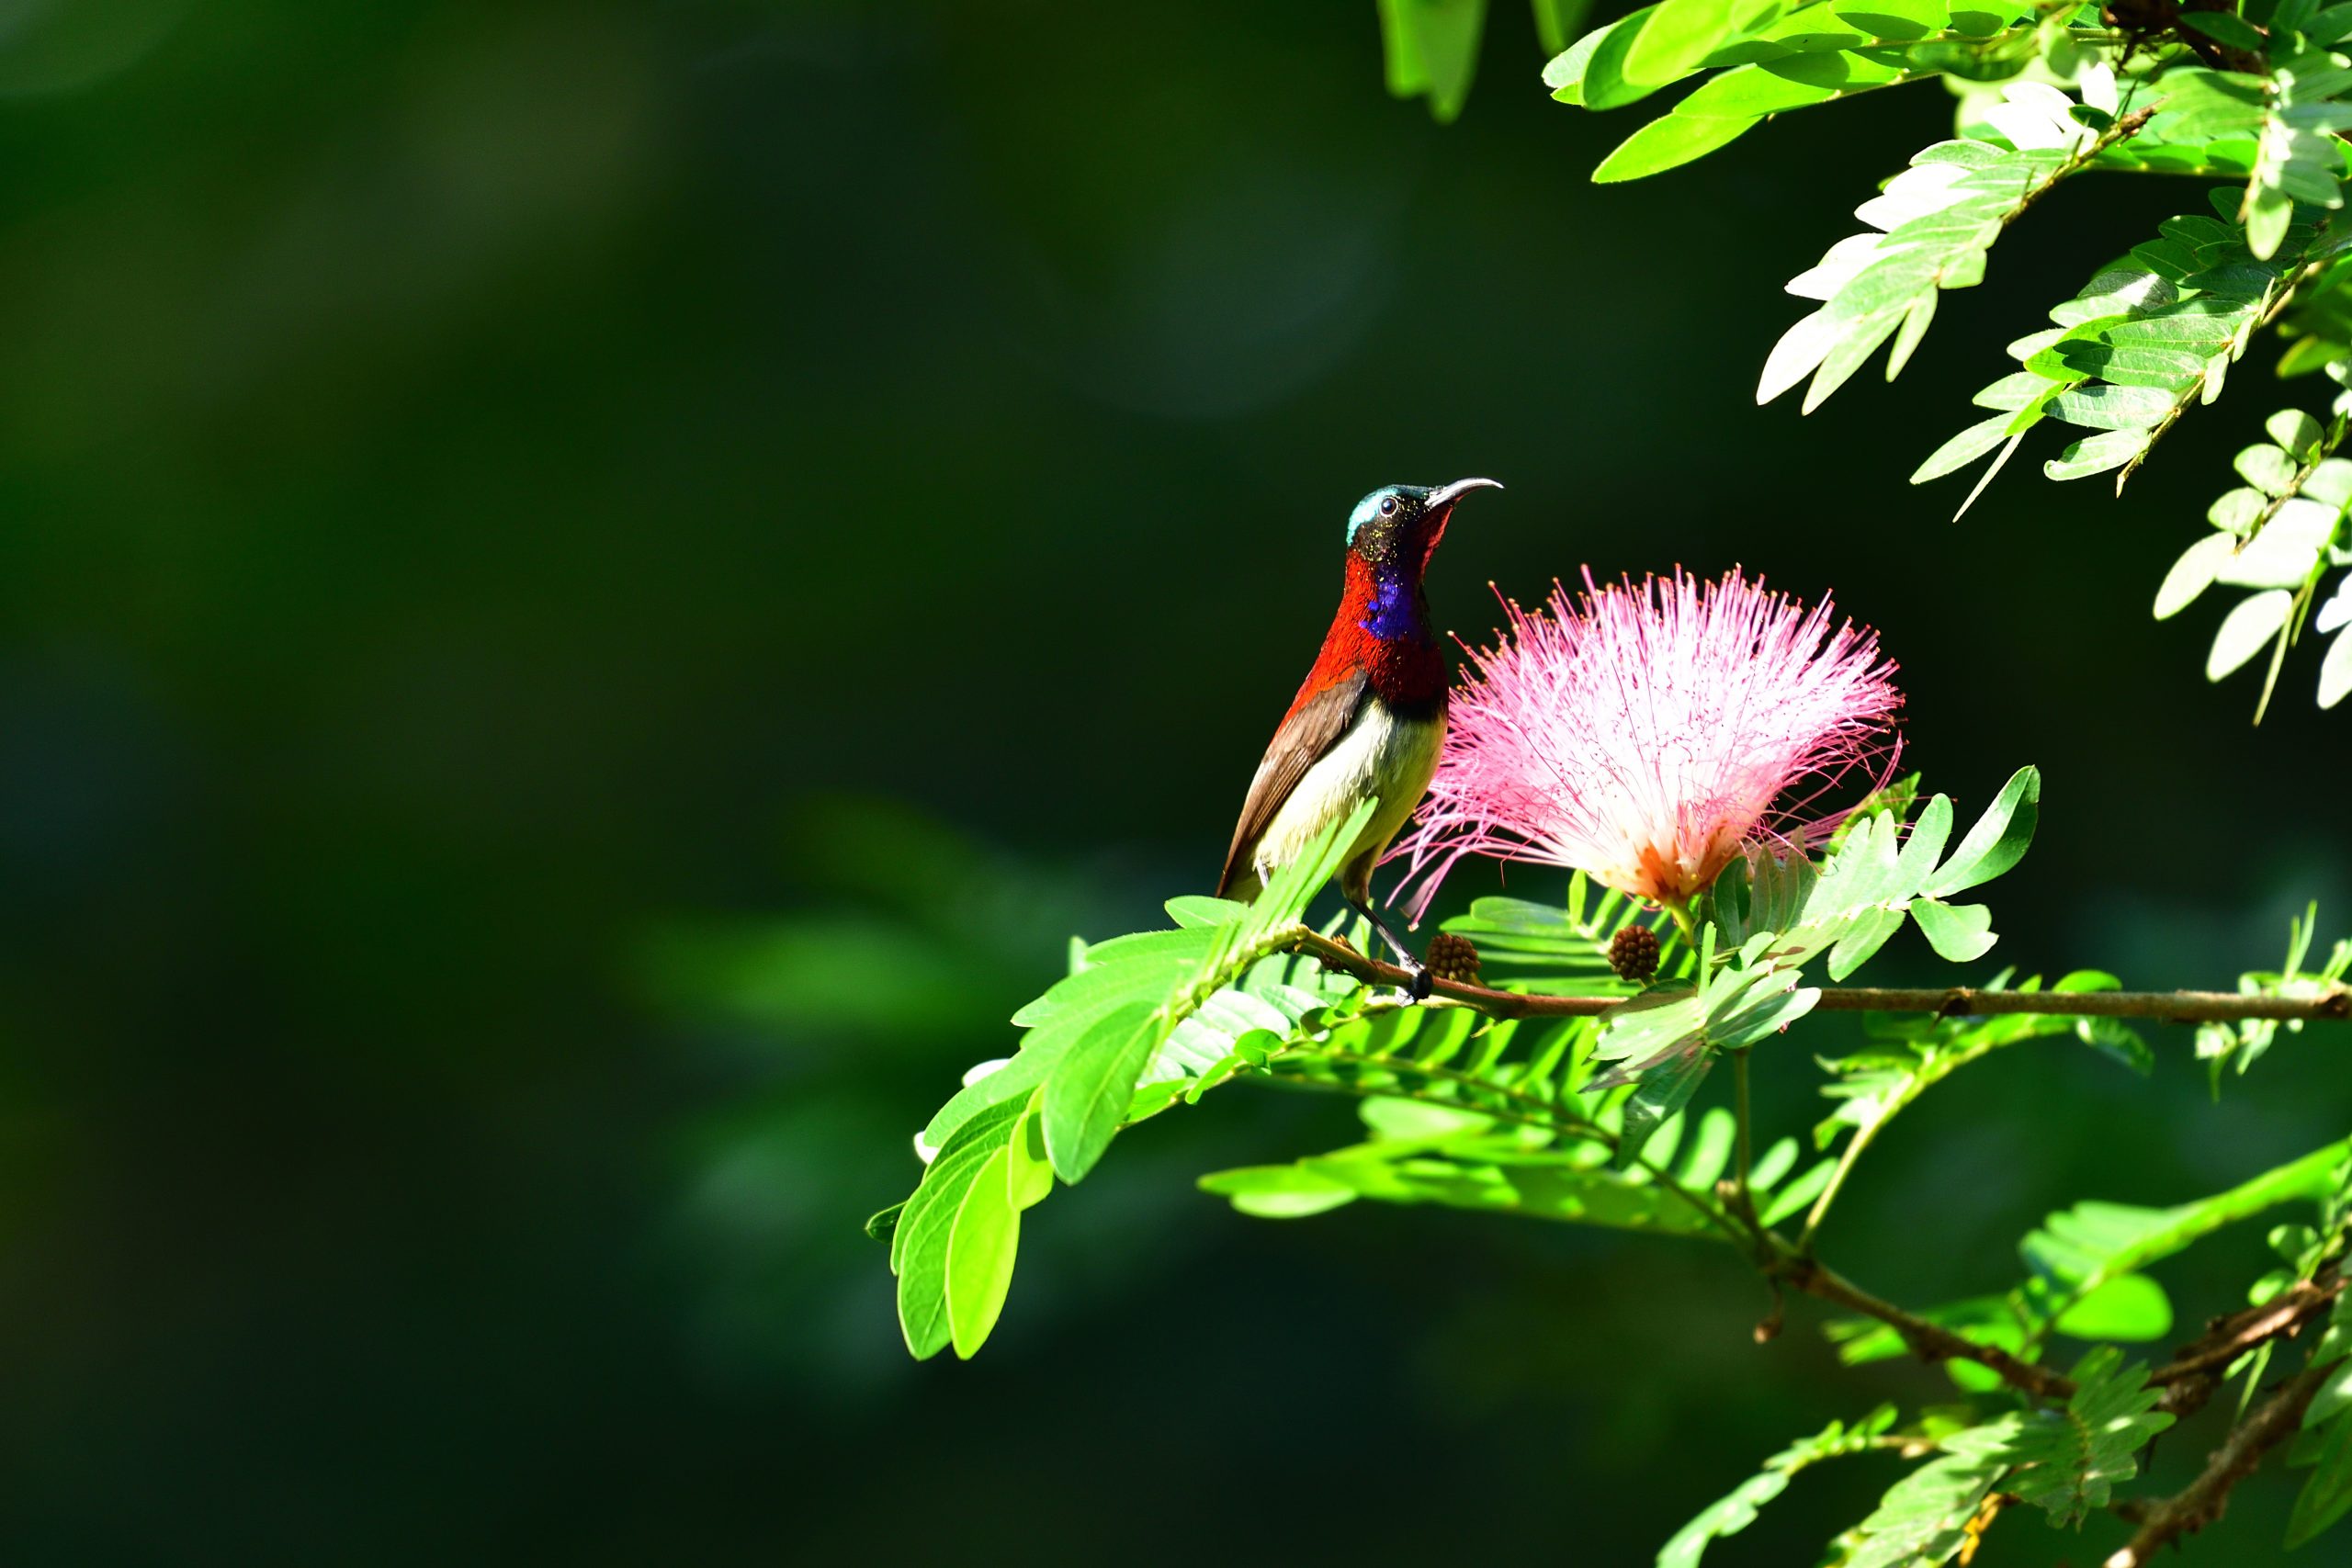 sunbird perched on branch